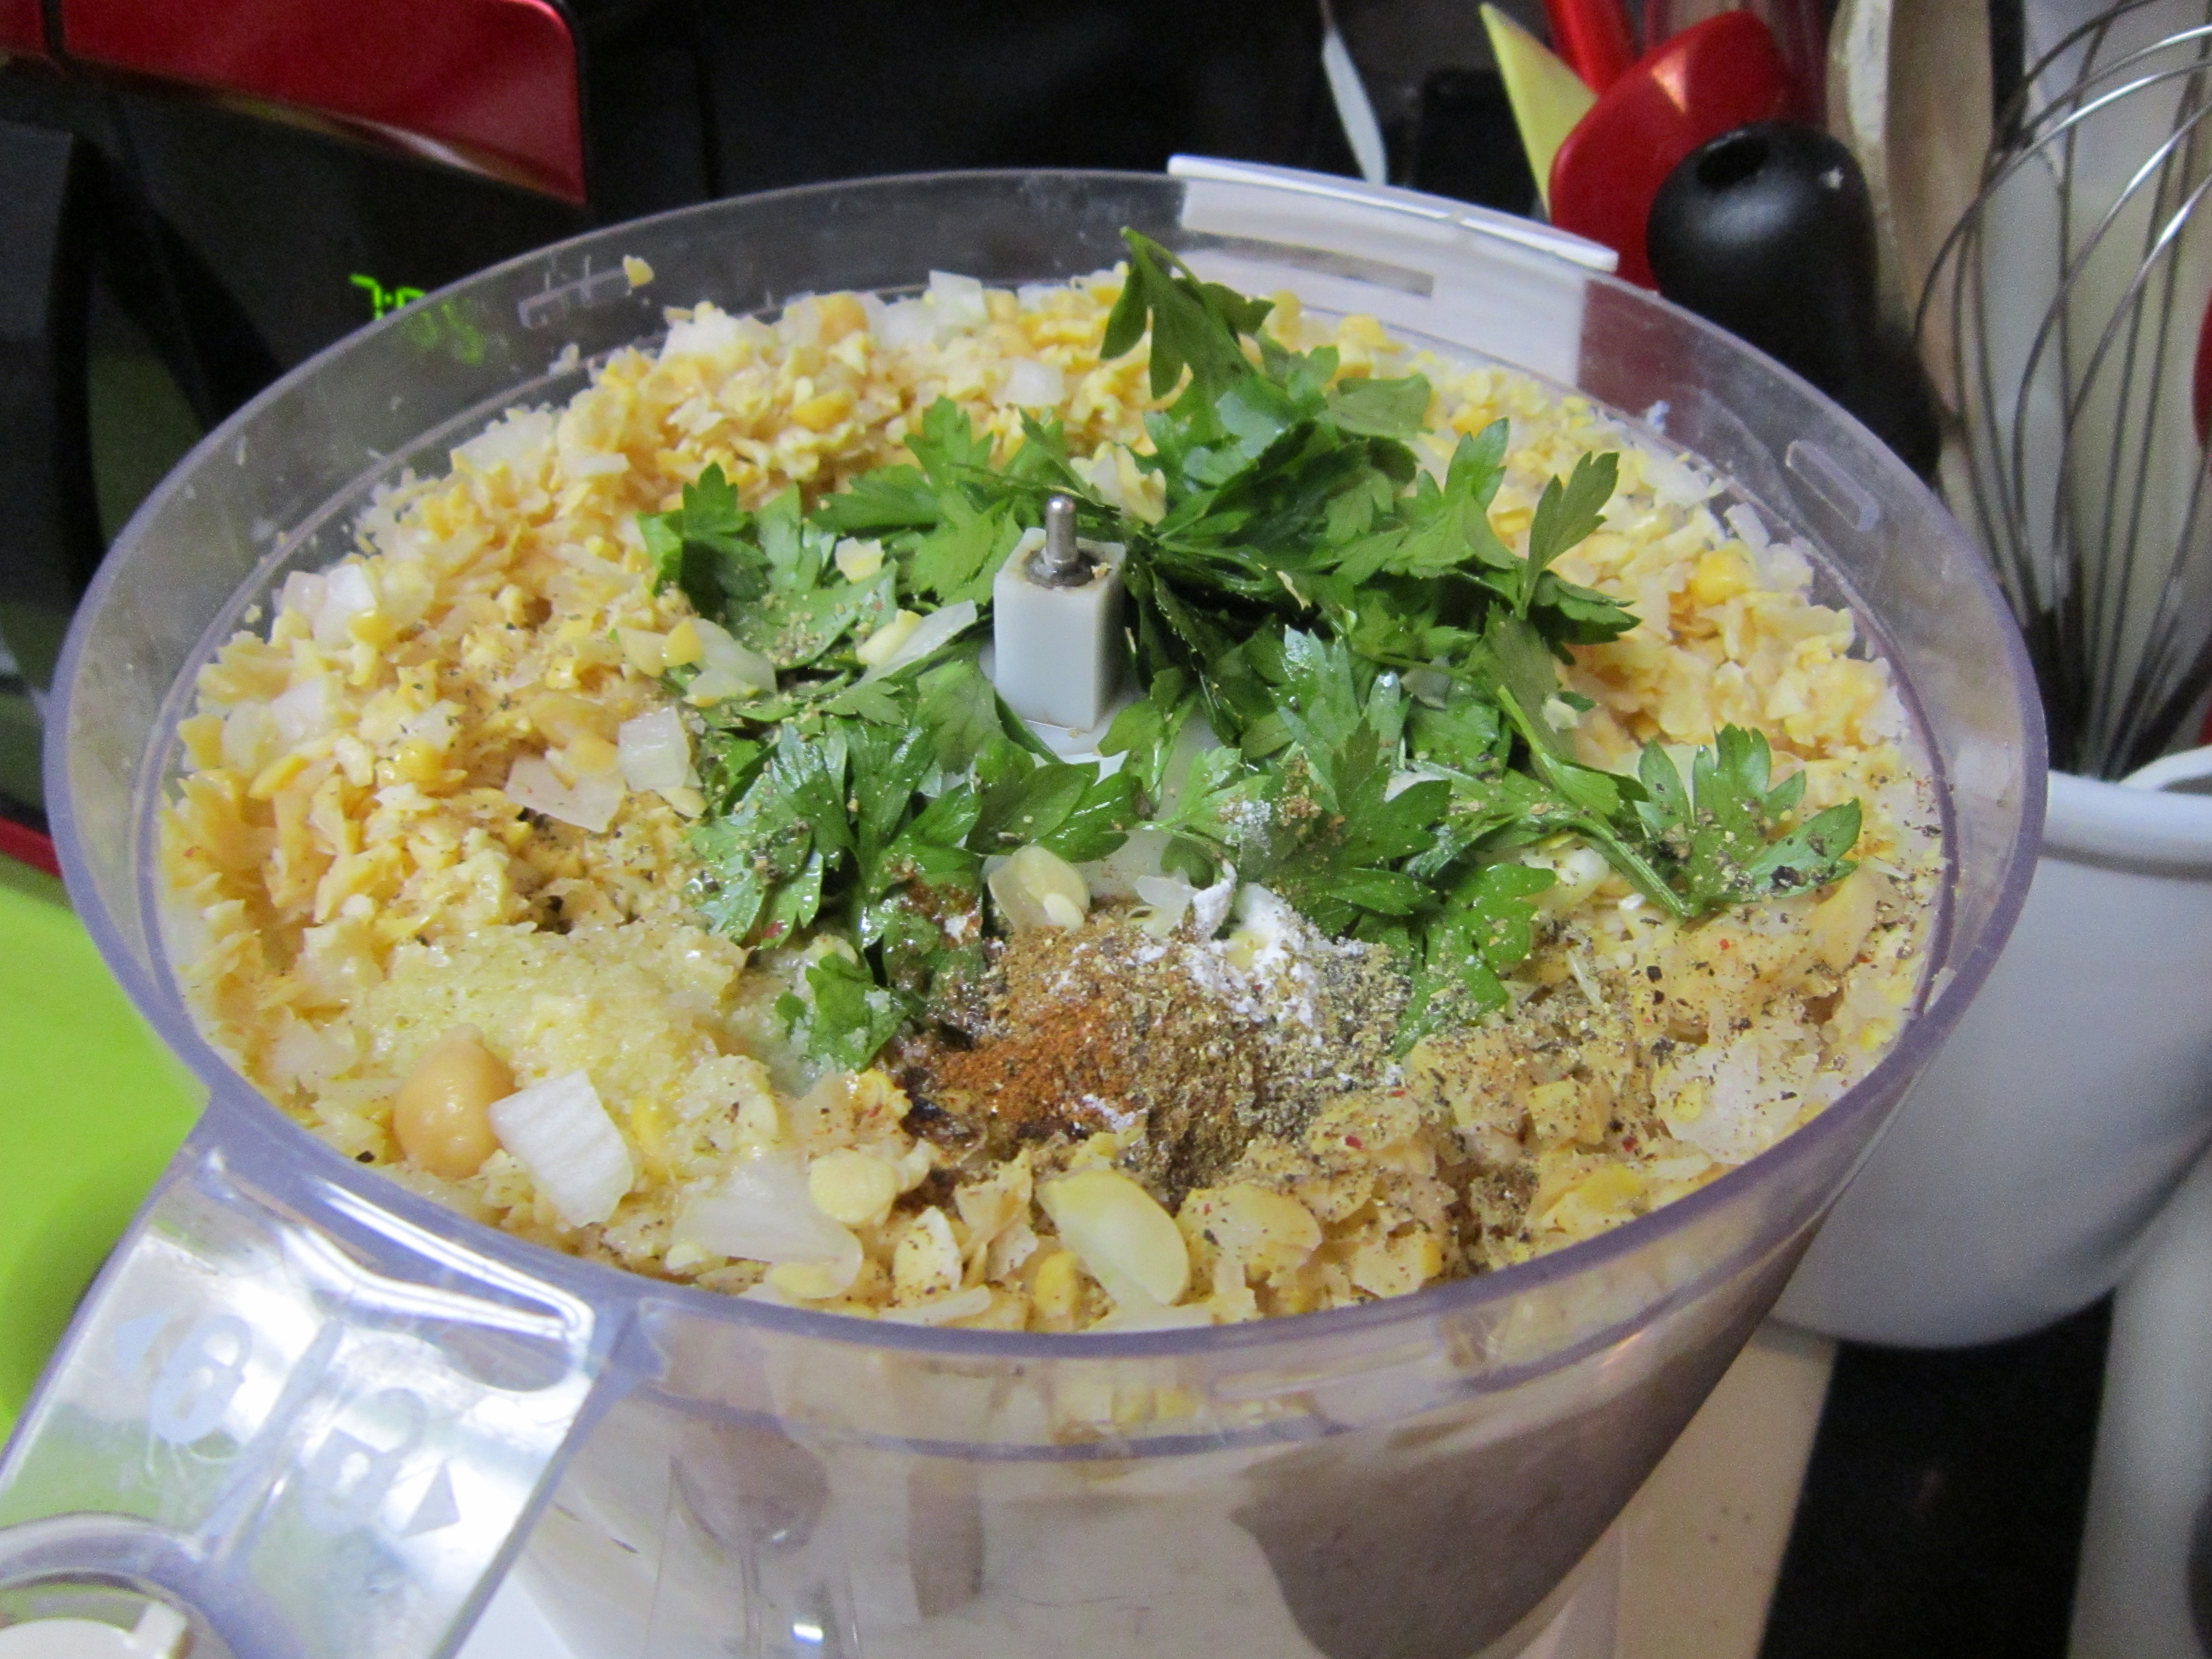 Add the ingredients to the food processor and blitz!